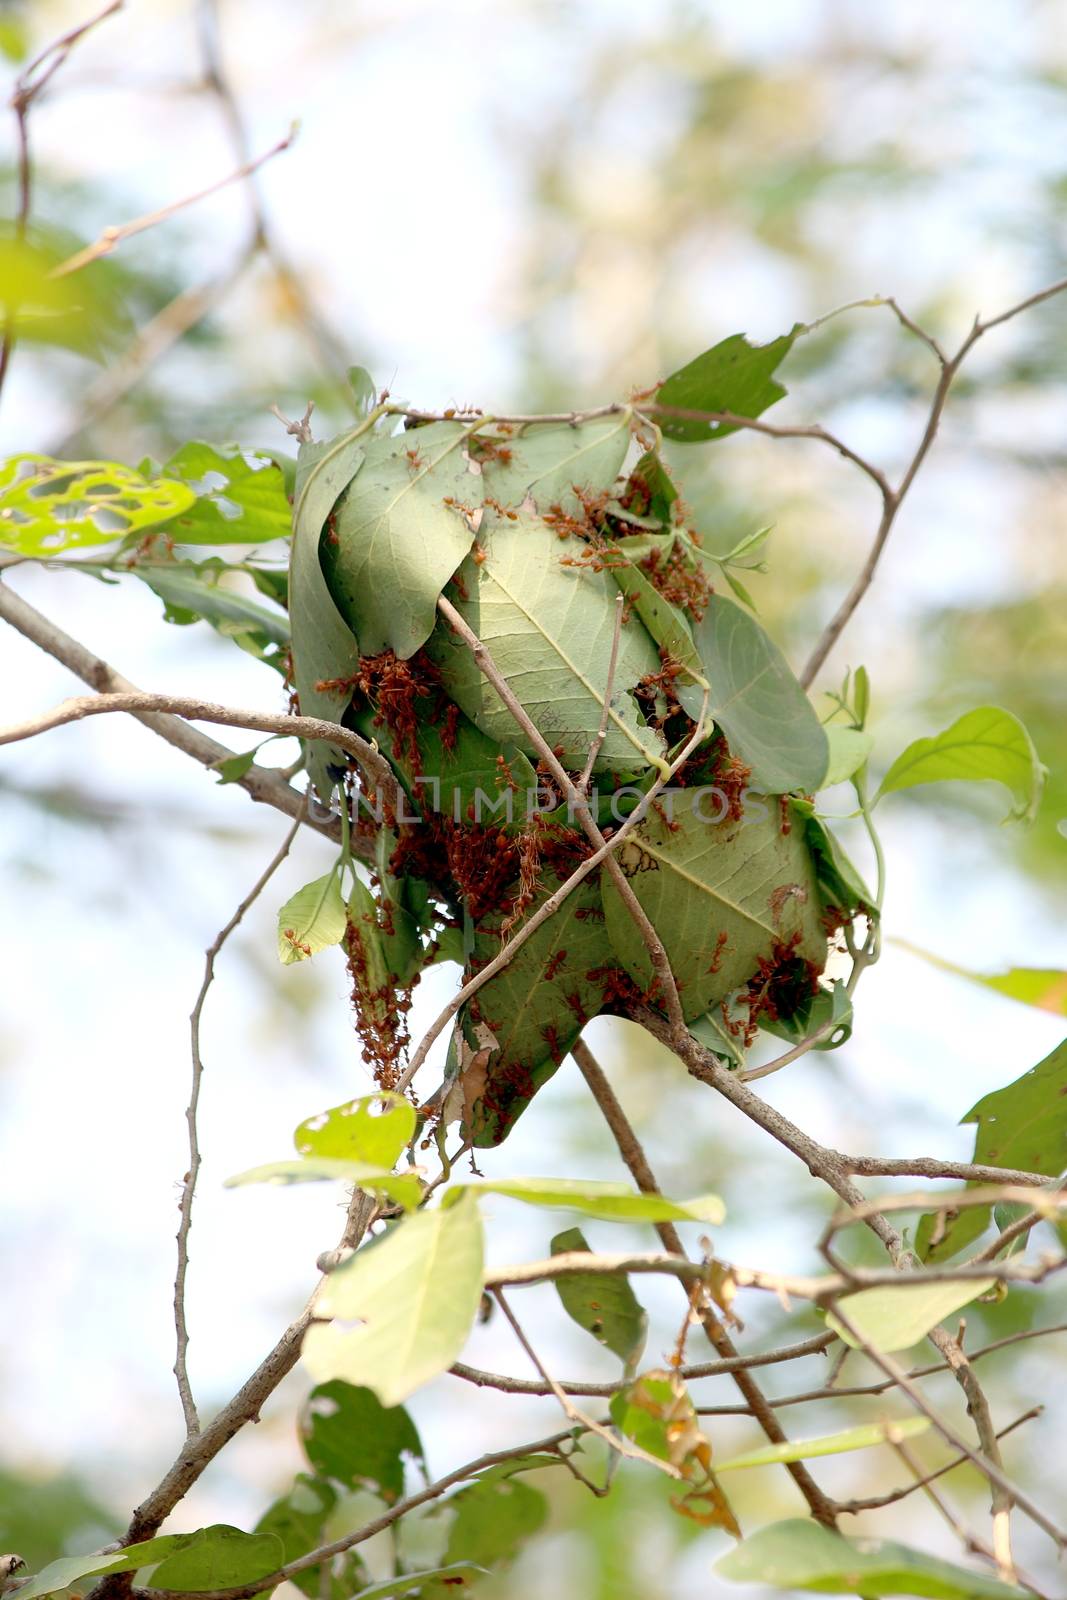 Ants, Red Ants, Ants nest on green leaves of a tree by joining together